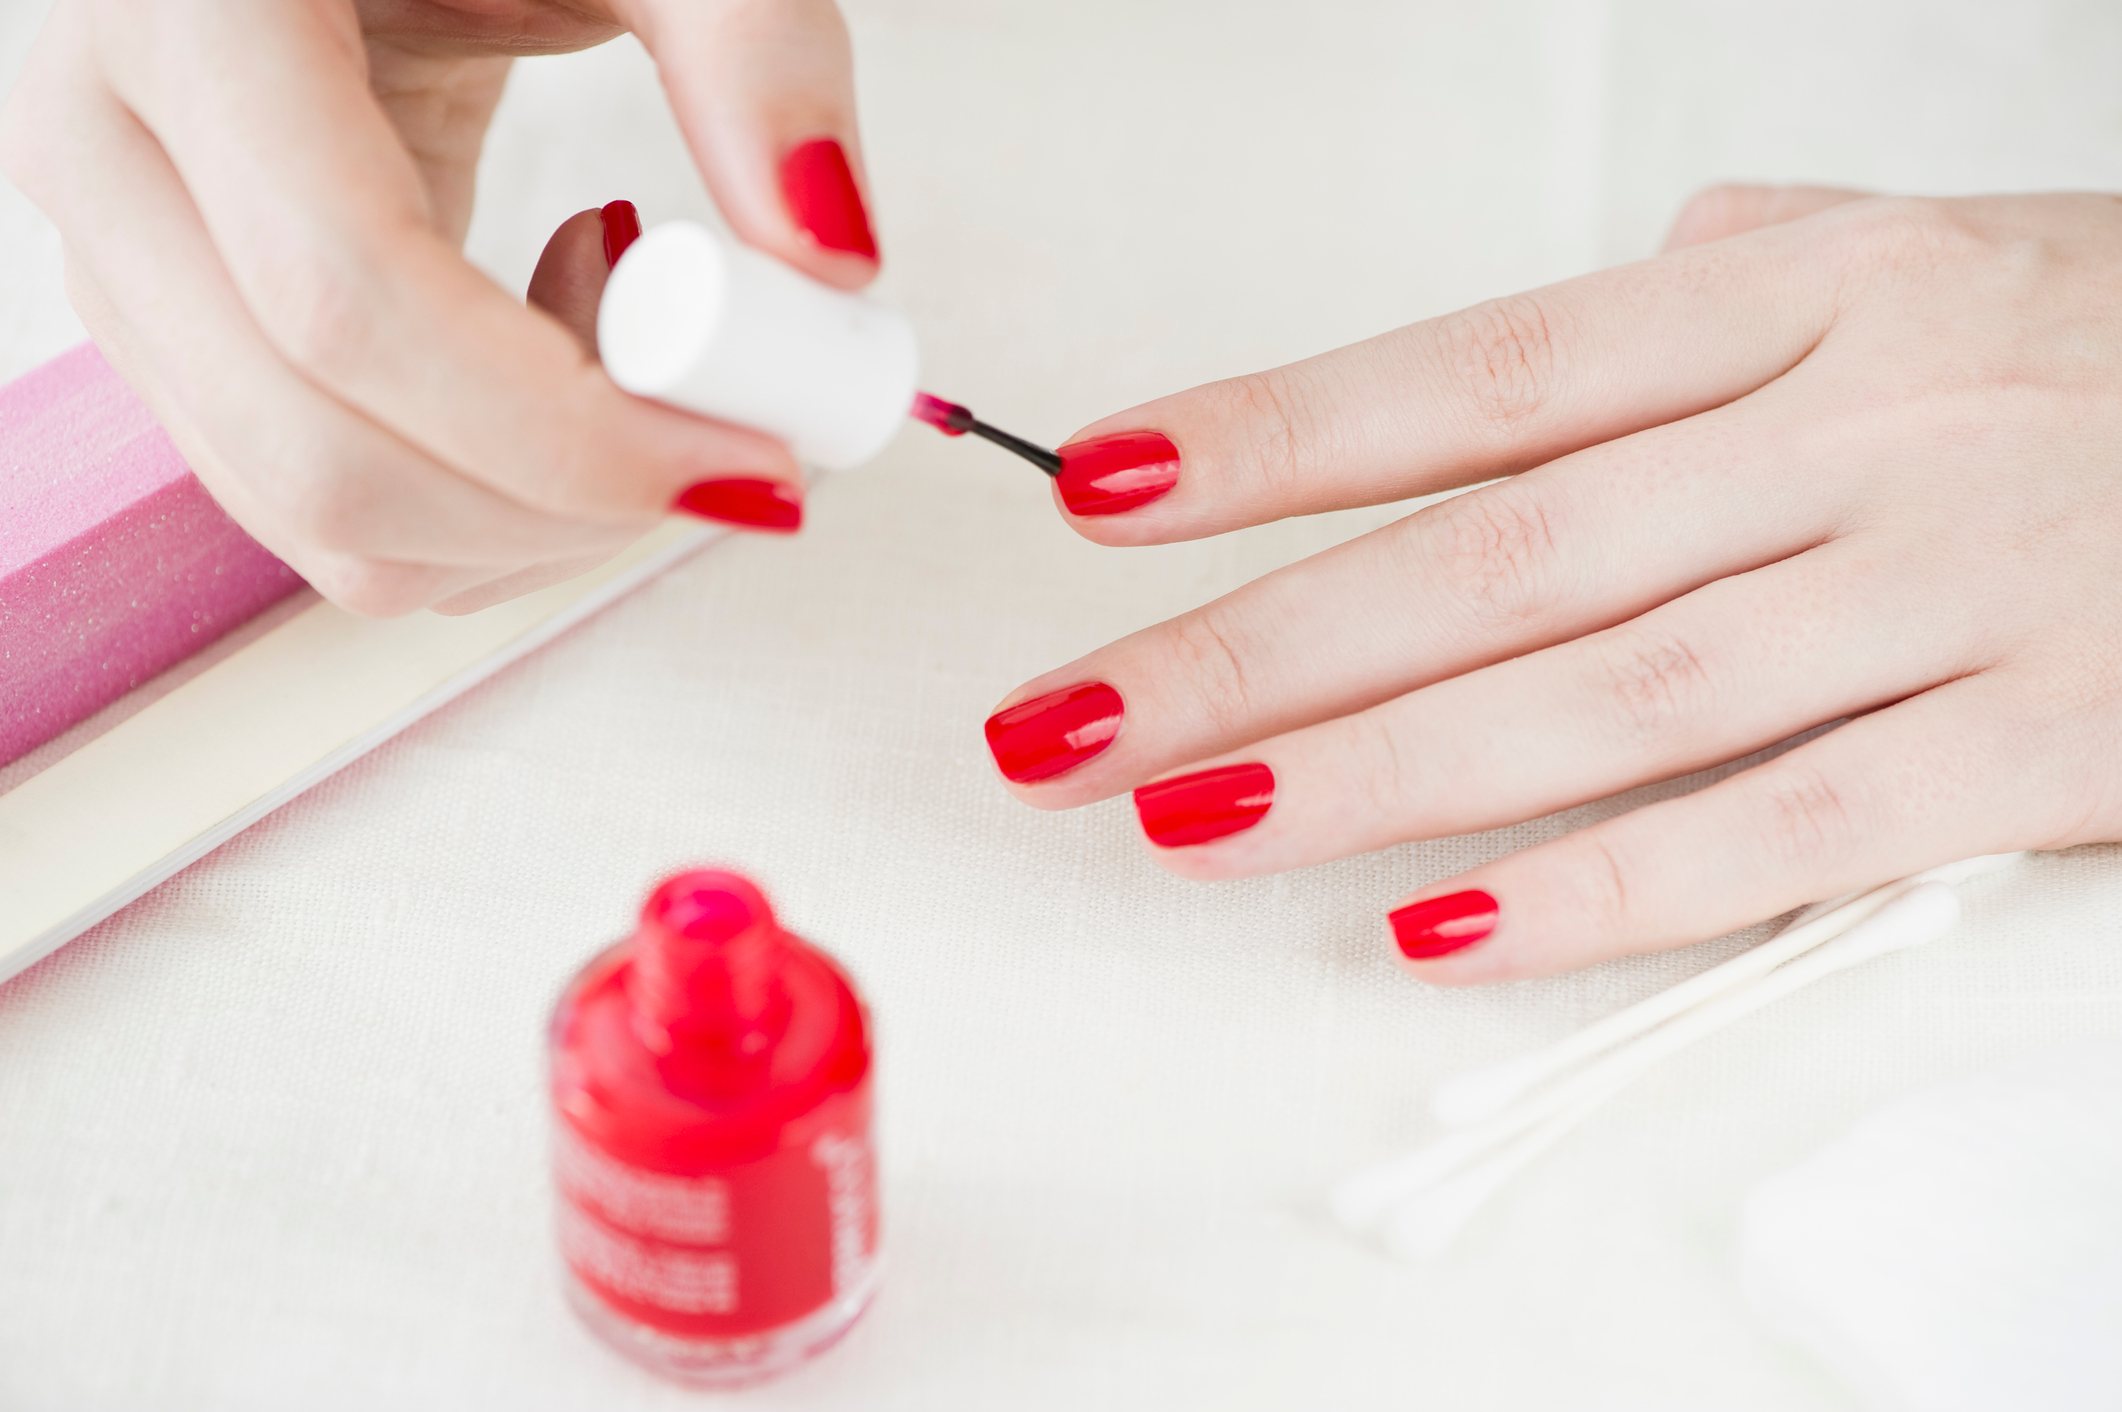 How to Make Nail Polish Dry Fast - Tips for Quick-Drying Polish